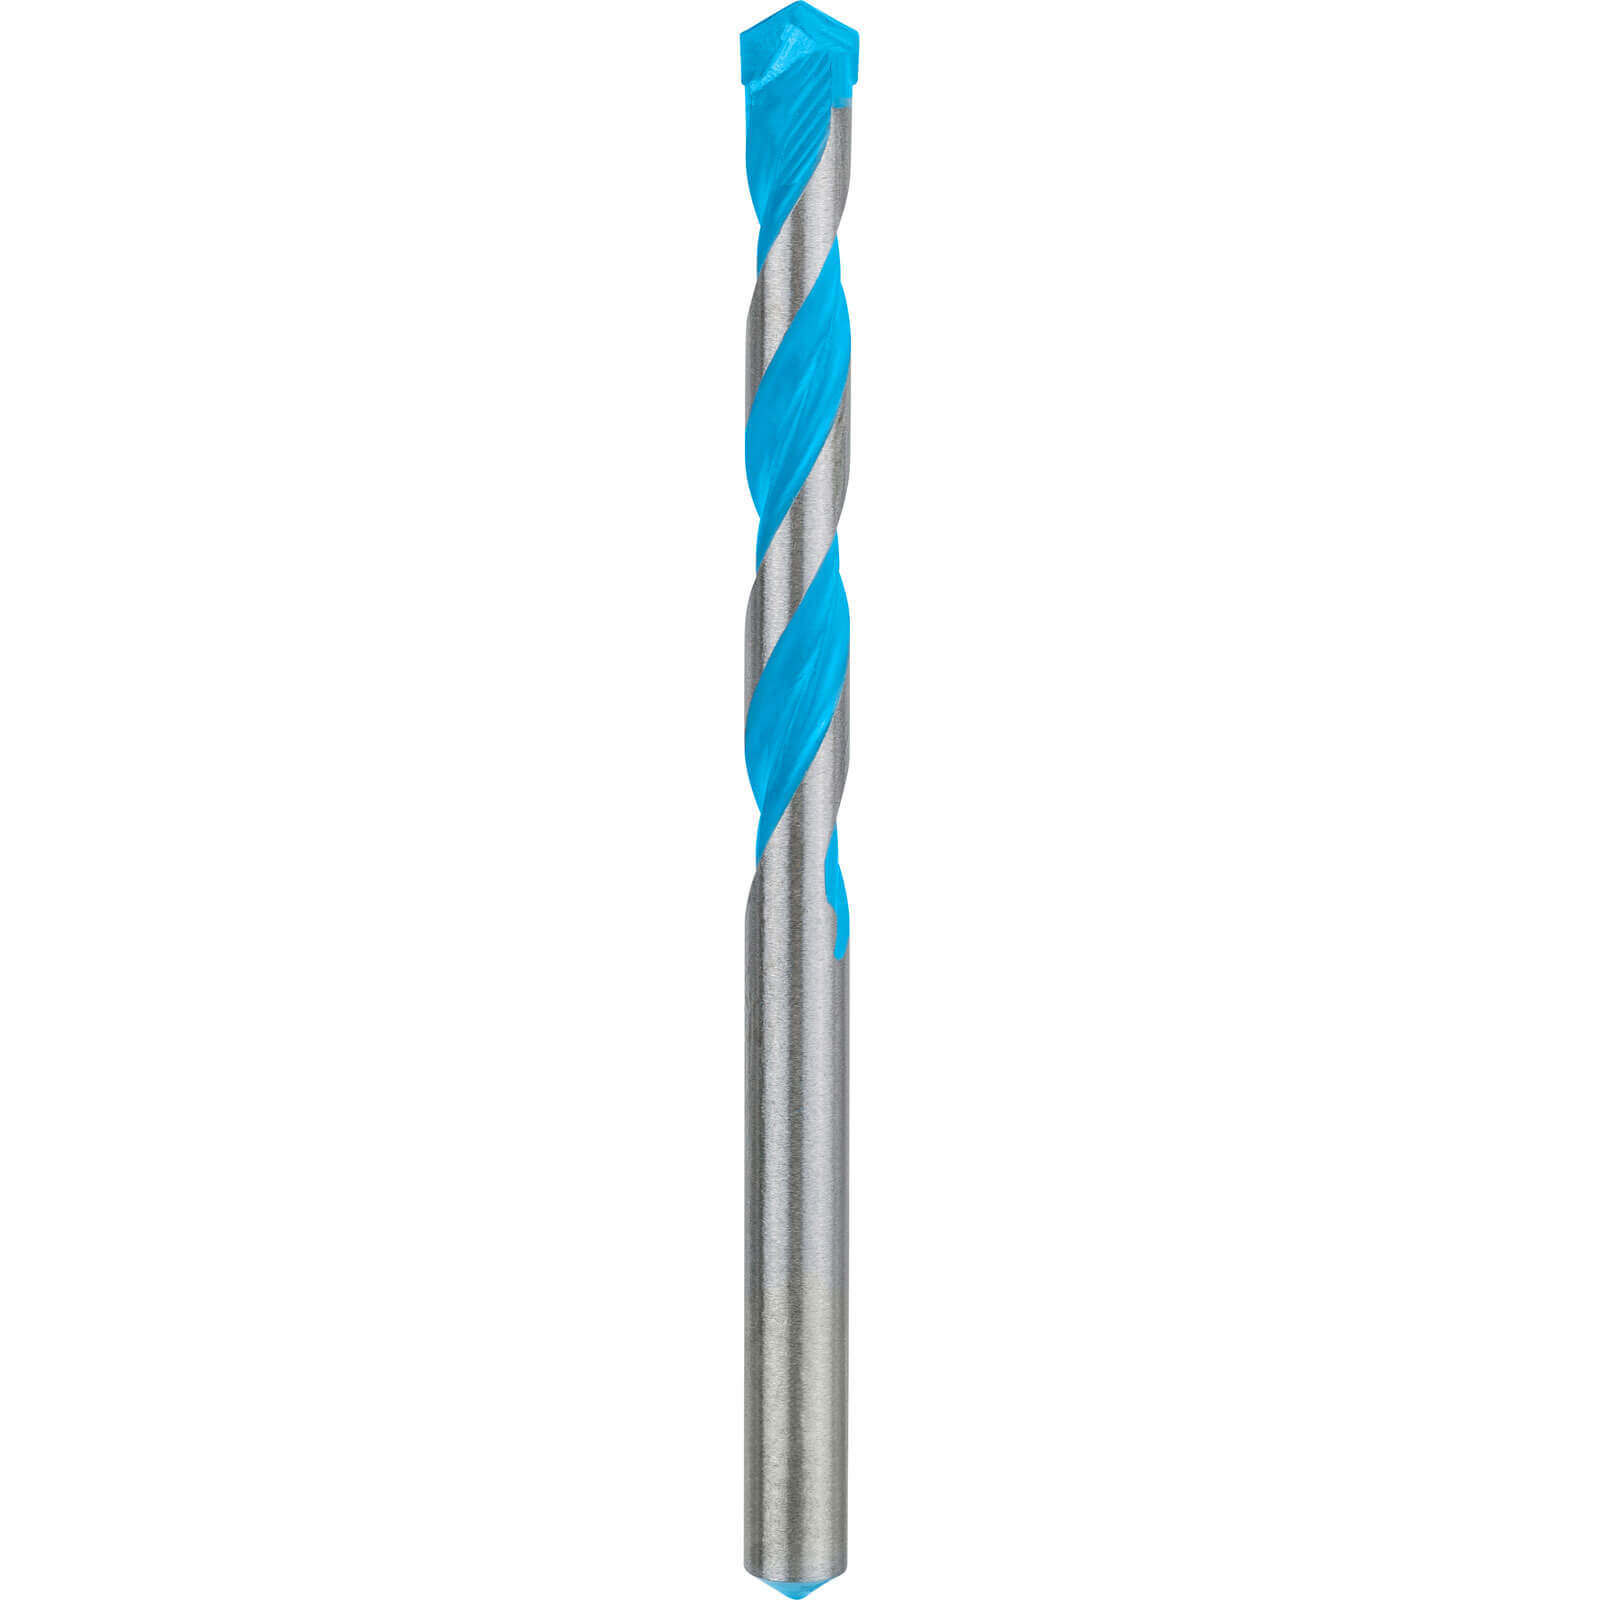 Photo of Bosch Expert Cyl-9 Multi Construction Drill Bit 9mm 120mm Pack Of 1